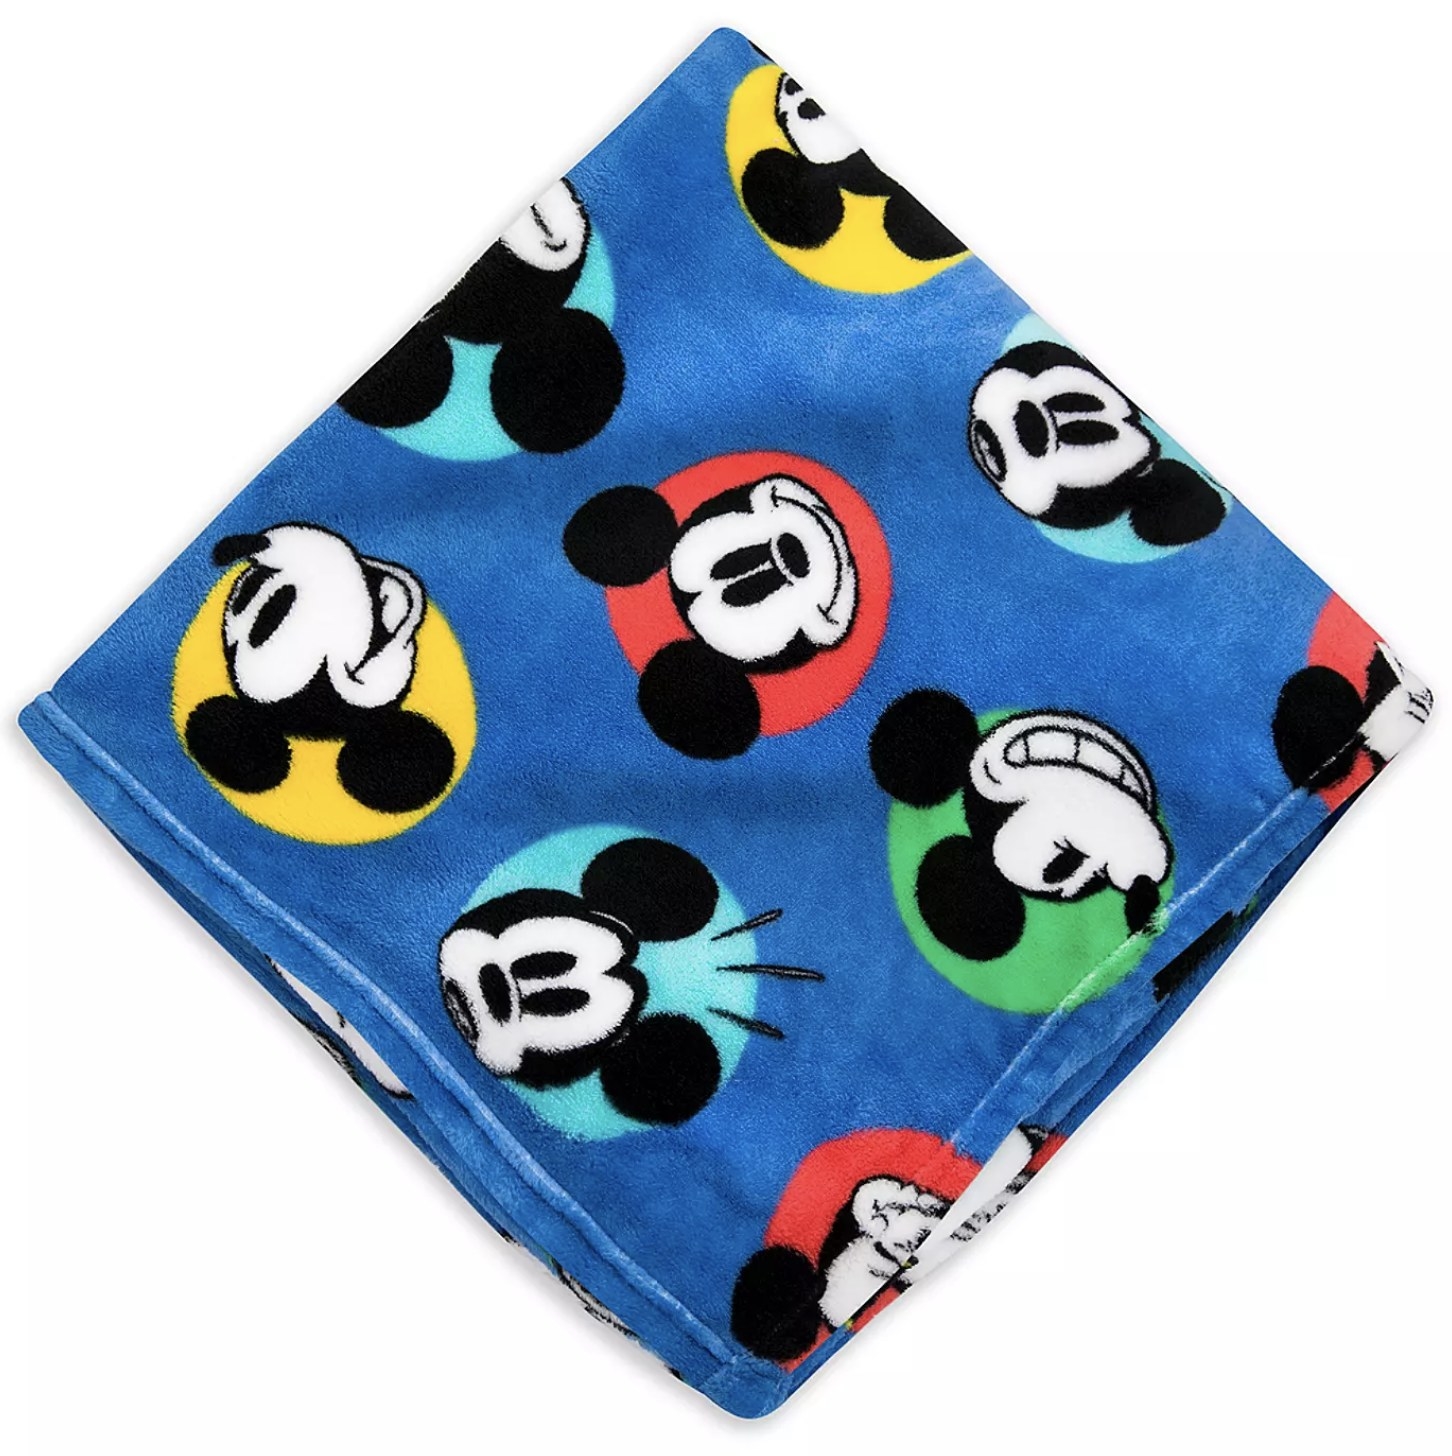 The blue Mickey Mouse blanket